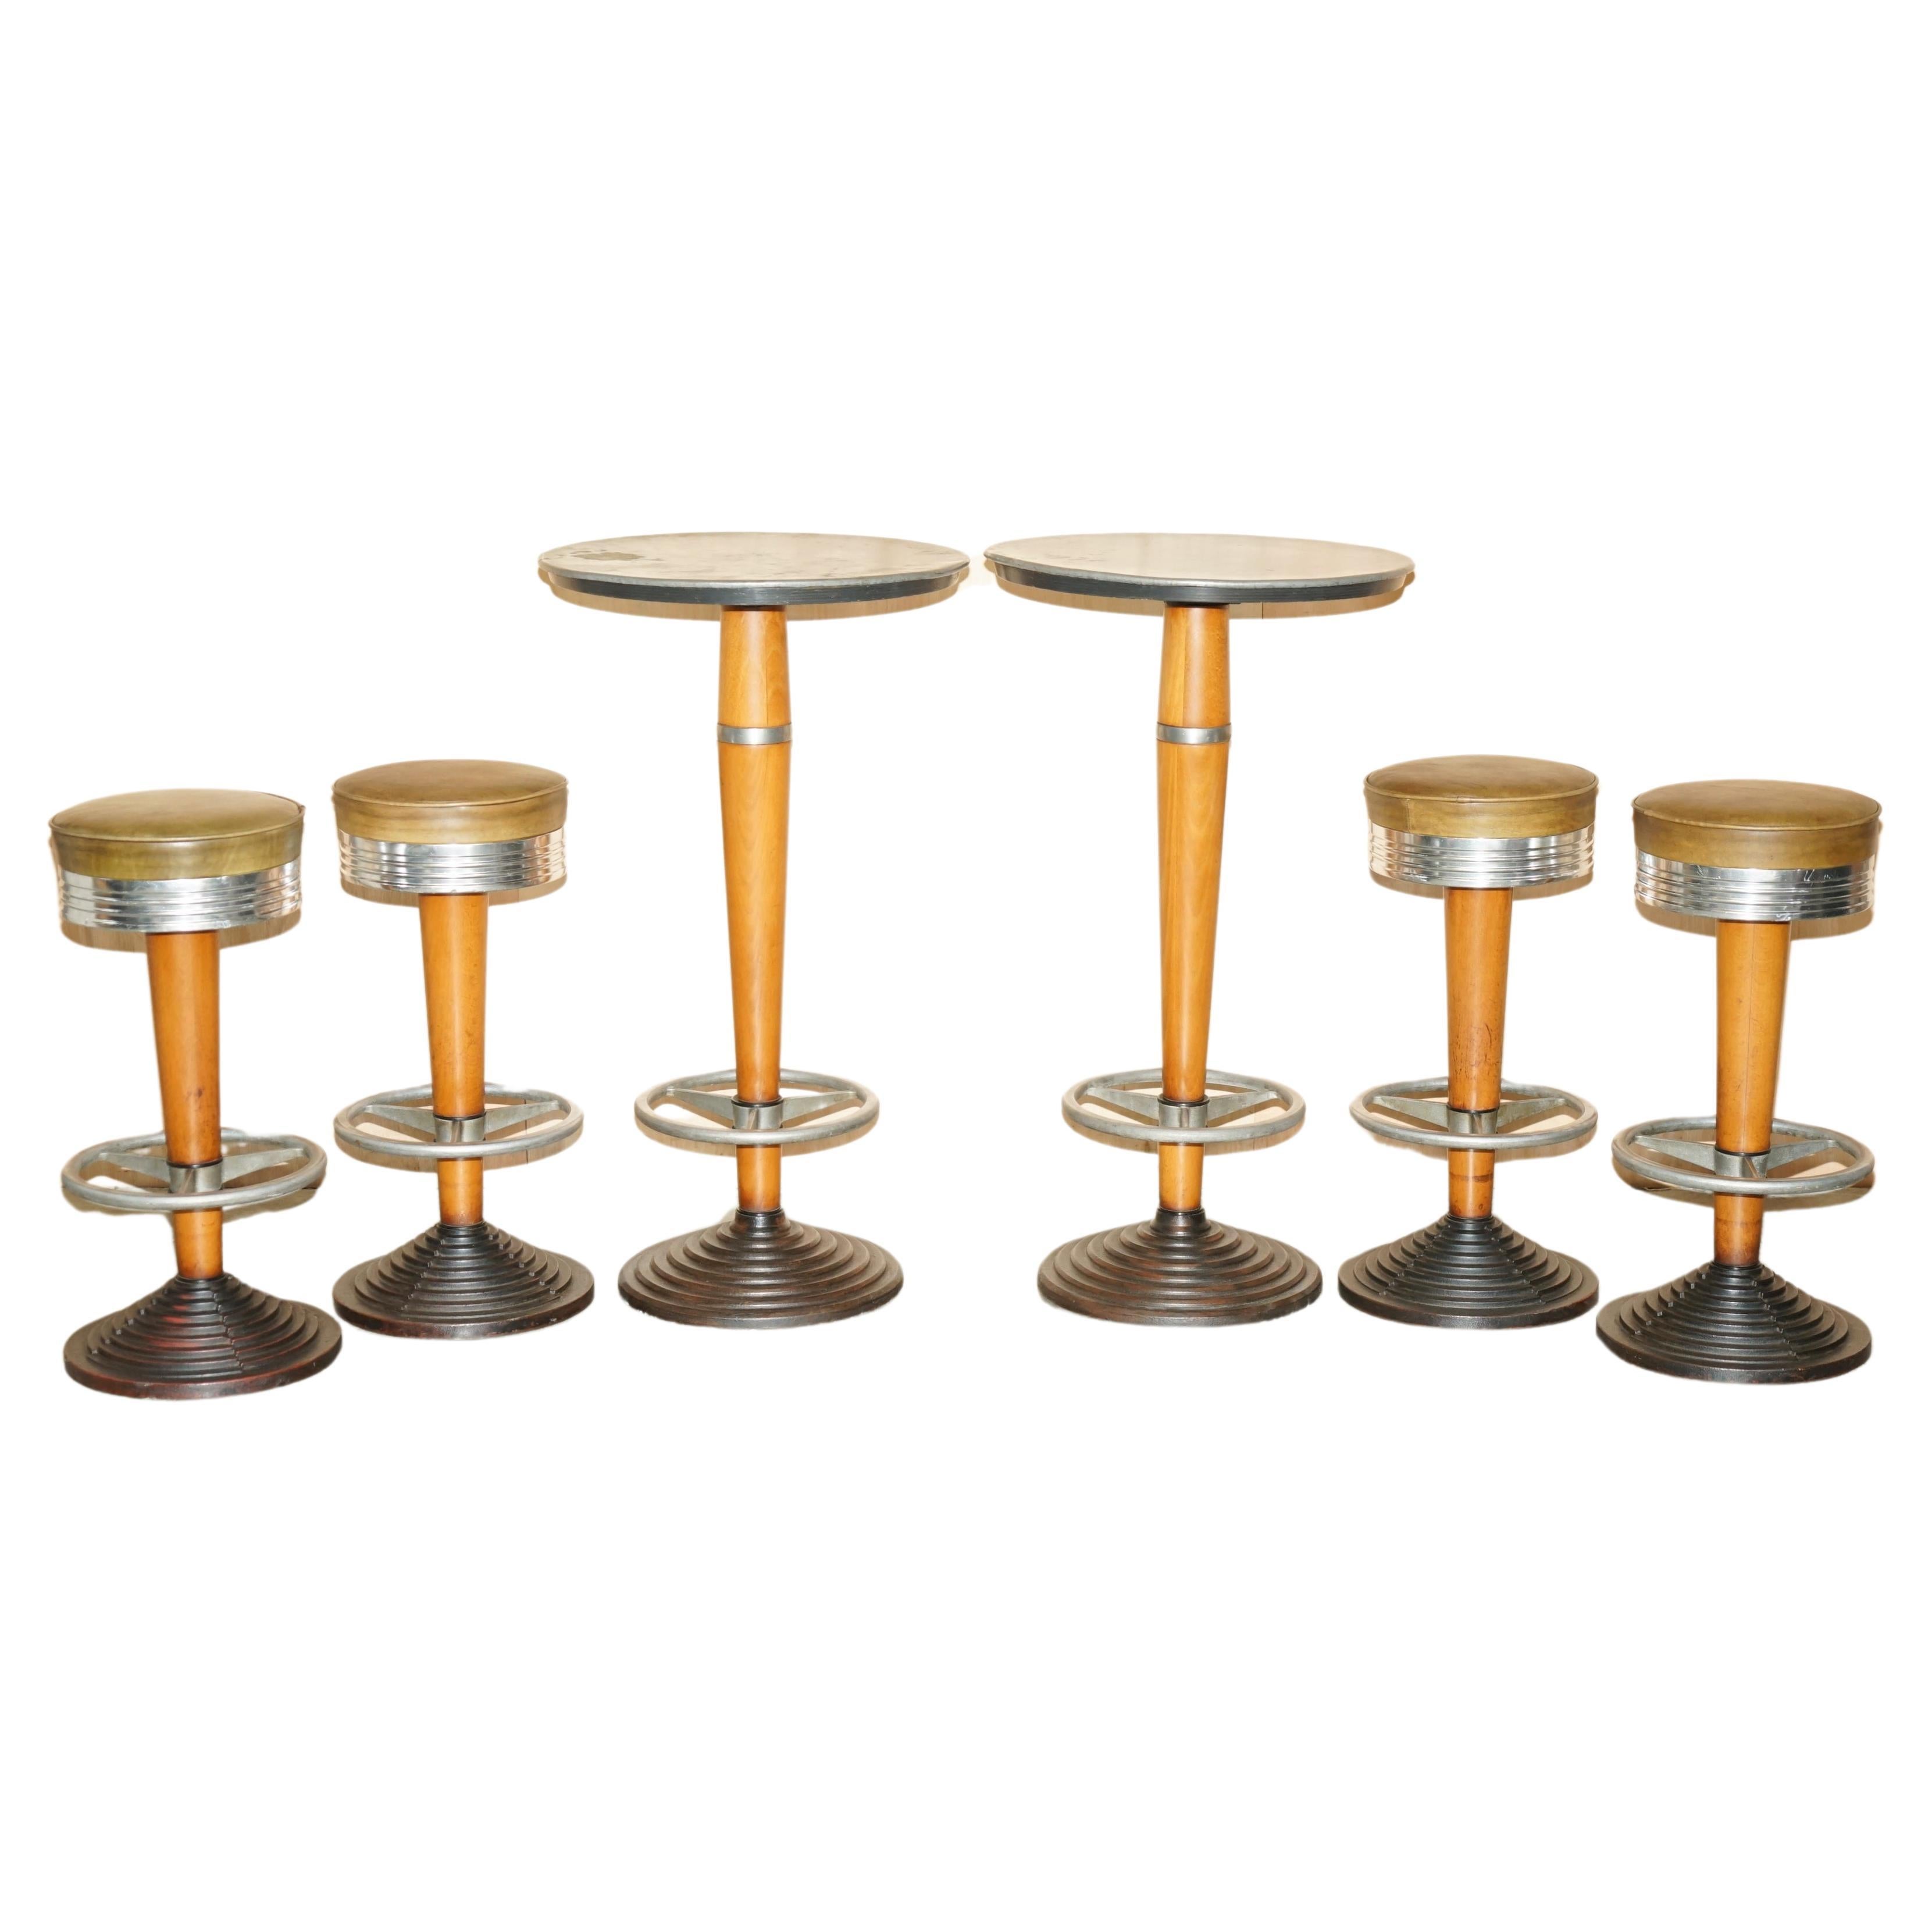 Royal House Antiques

Royal House Antiques is delighted to offer for sale this super rare suite of Art Deco bar stools with brown leather tops and matching zinc topped table

Please note the delivery fee listed is just a guide, it covers within the